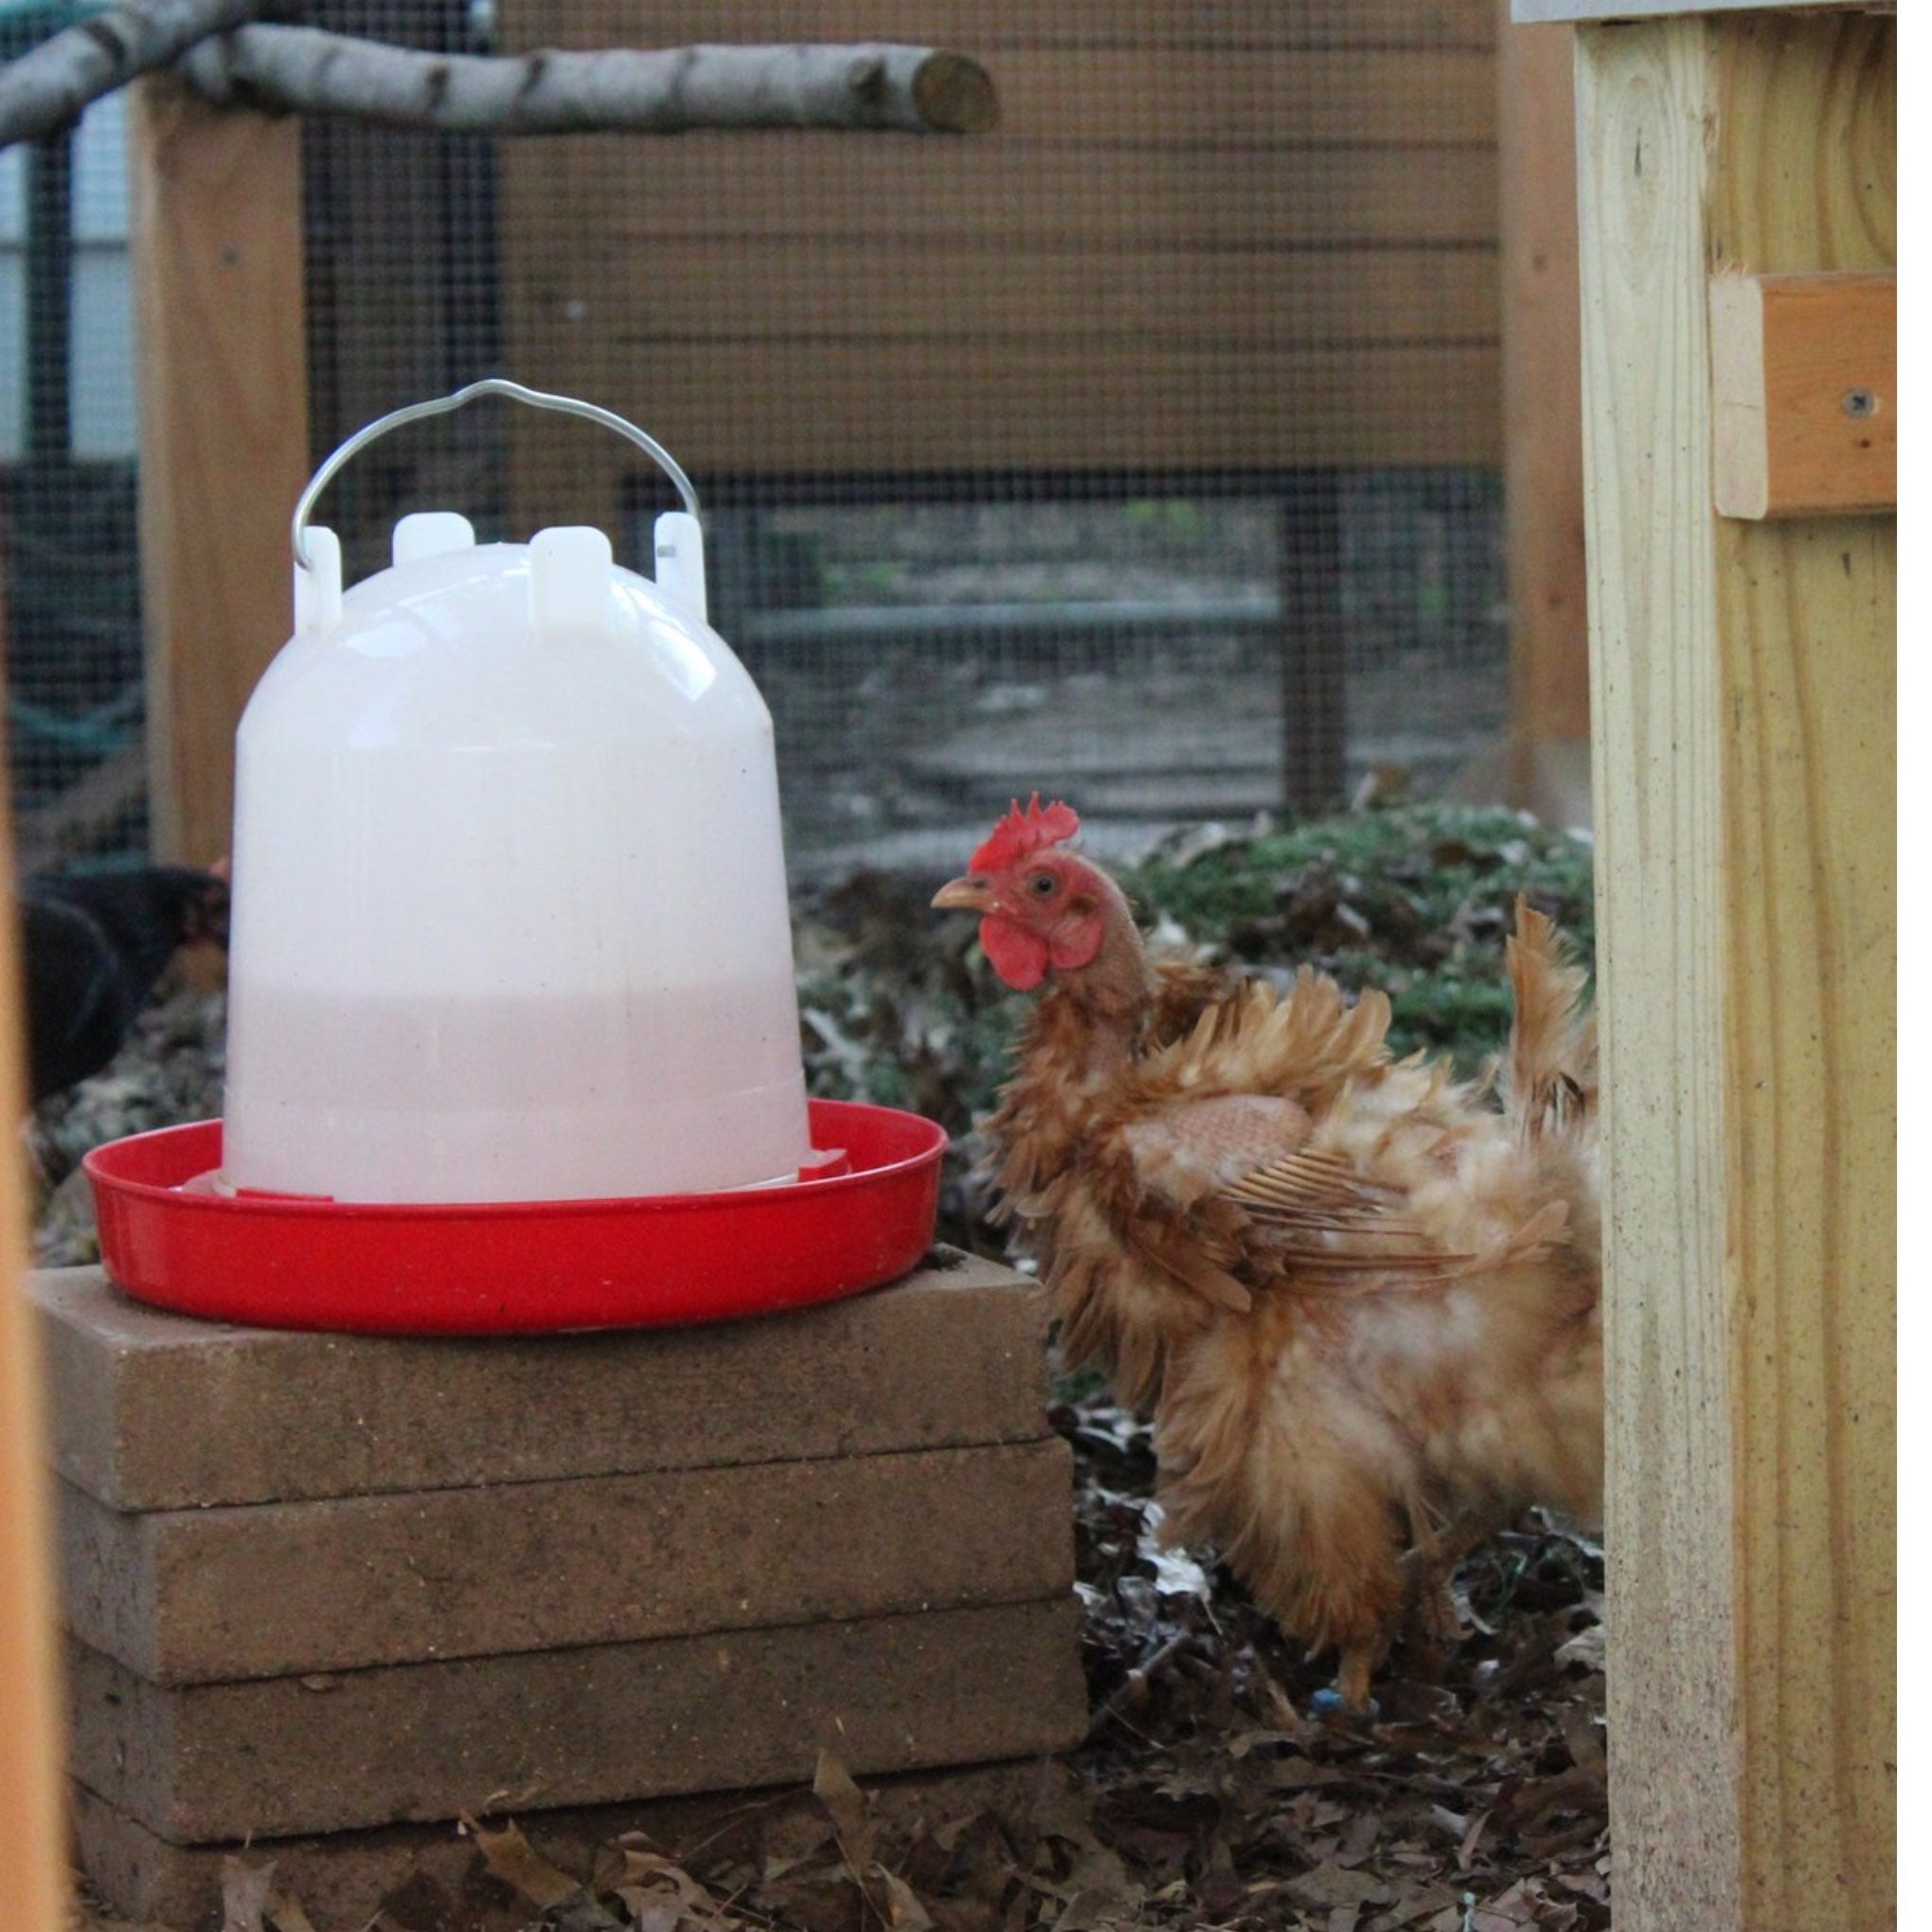 Red based Water drinker with chickens enjoying the ease of access.